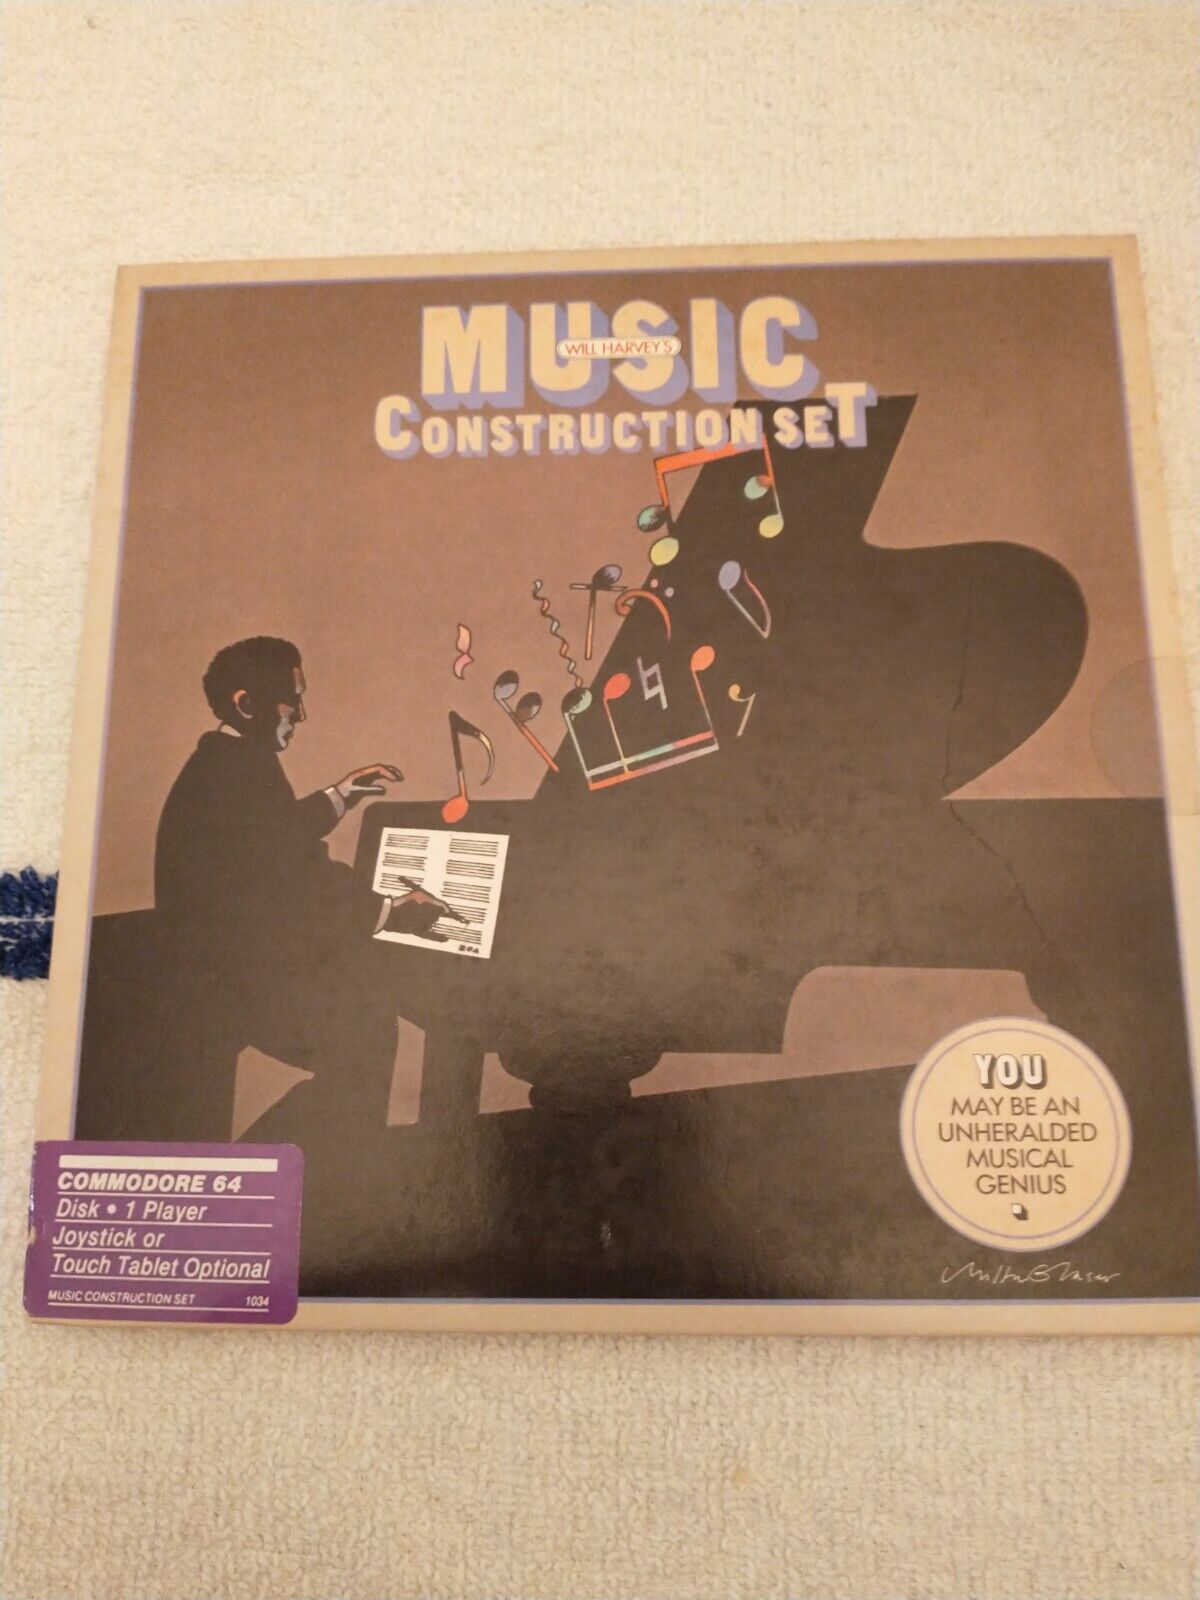 Vintage Software 1984 MUSIC CONSTRUCTION SET Will Harvey Game COMMODORE 64